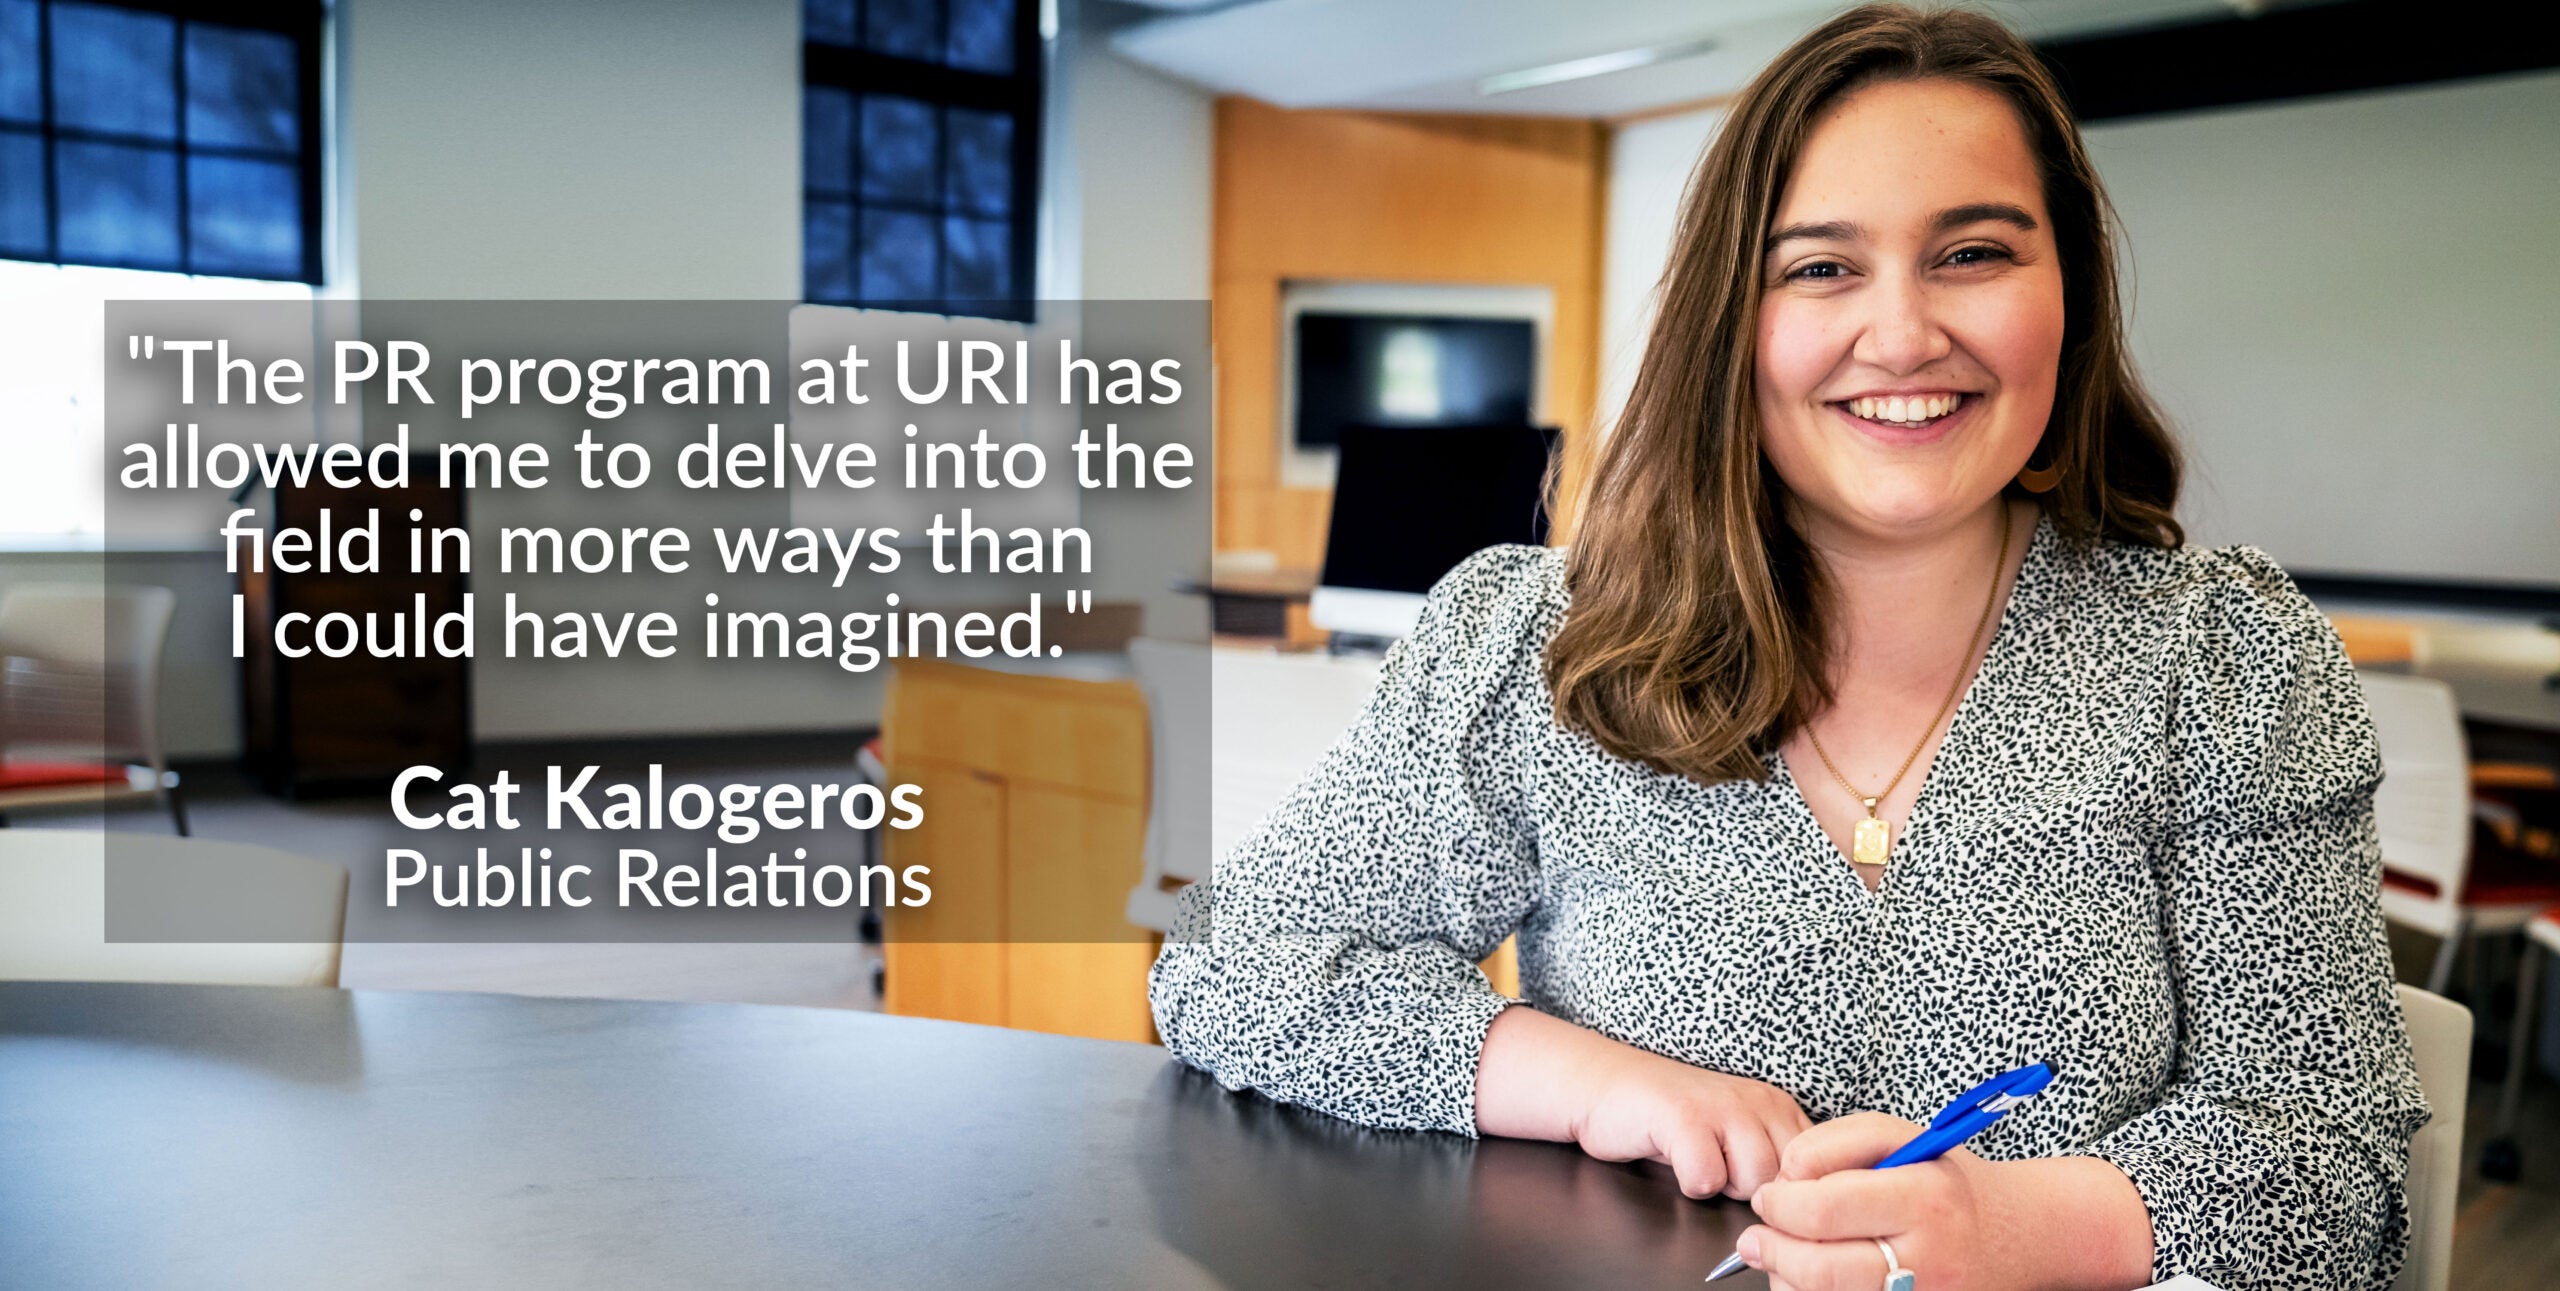 Photo of Public Relations Student, Cat Kalogeros with quote "The PR program at URI has allowed me to delve into the field in more ways than I could have imagined.”